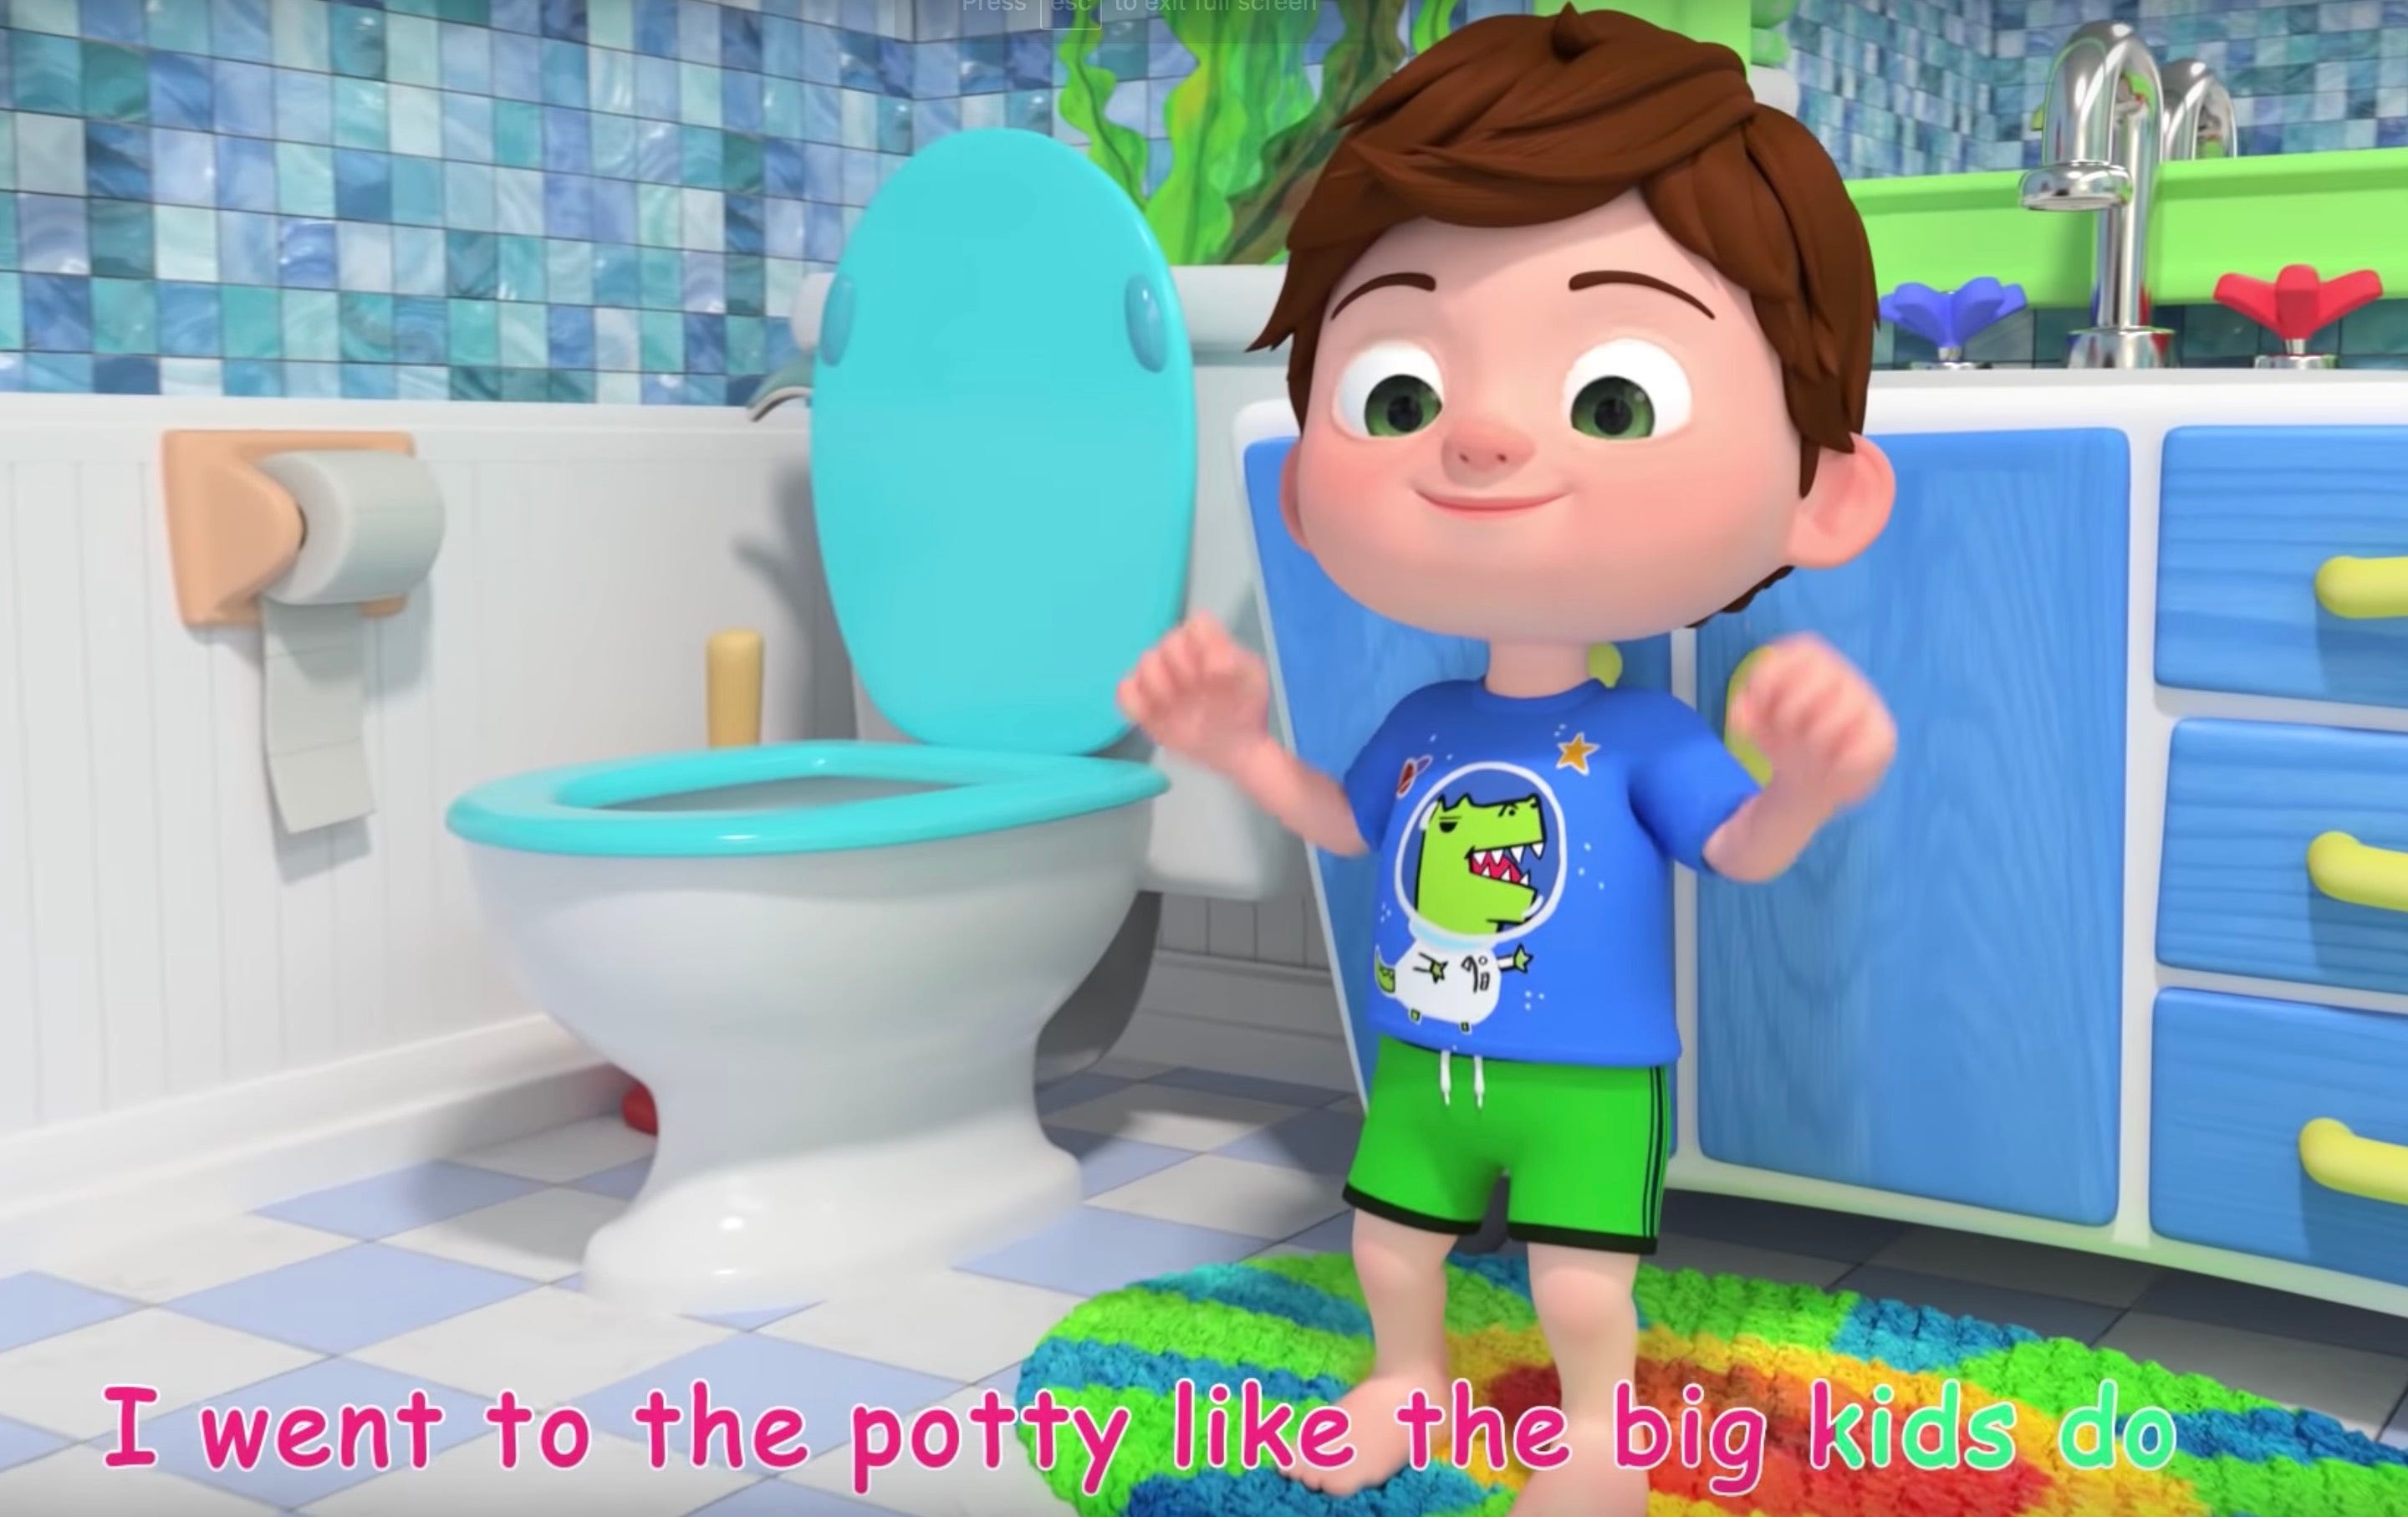 Minor Porn Animated - Nursery rhymes i& Toy Story porn on YouTube. That's the kid ...